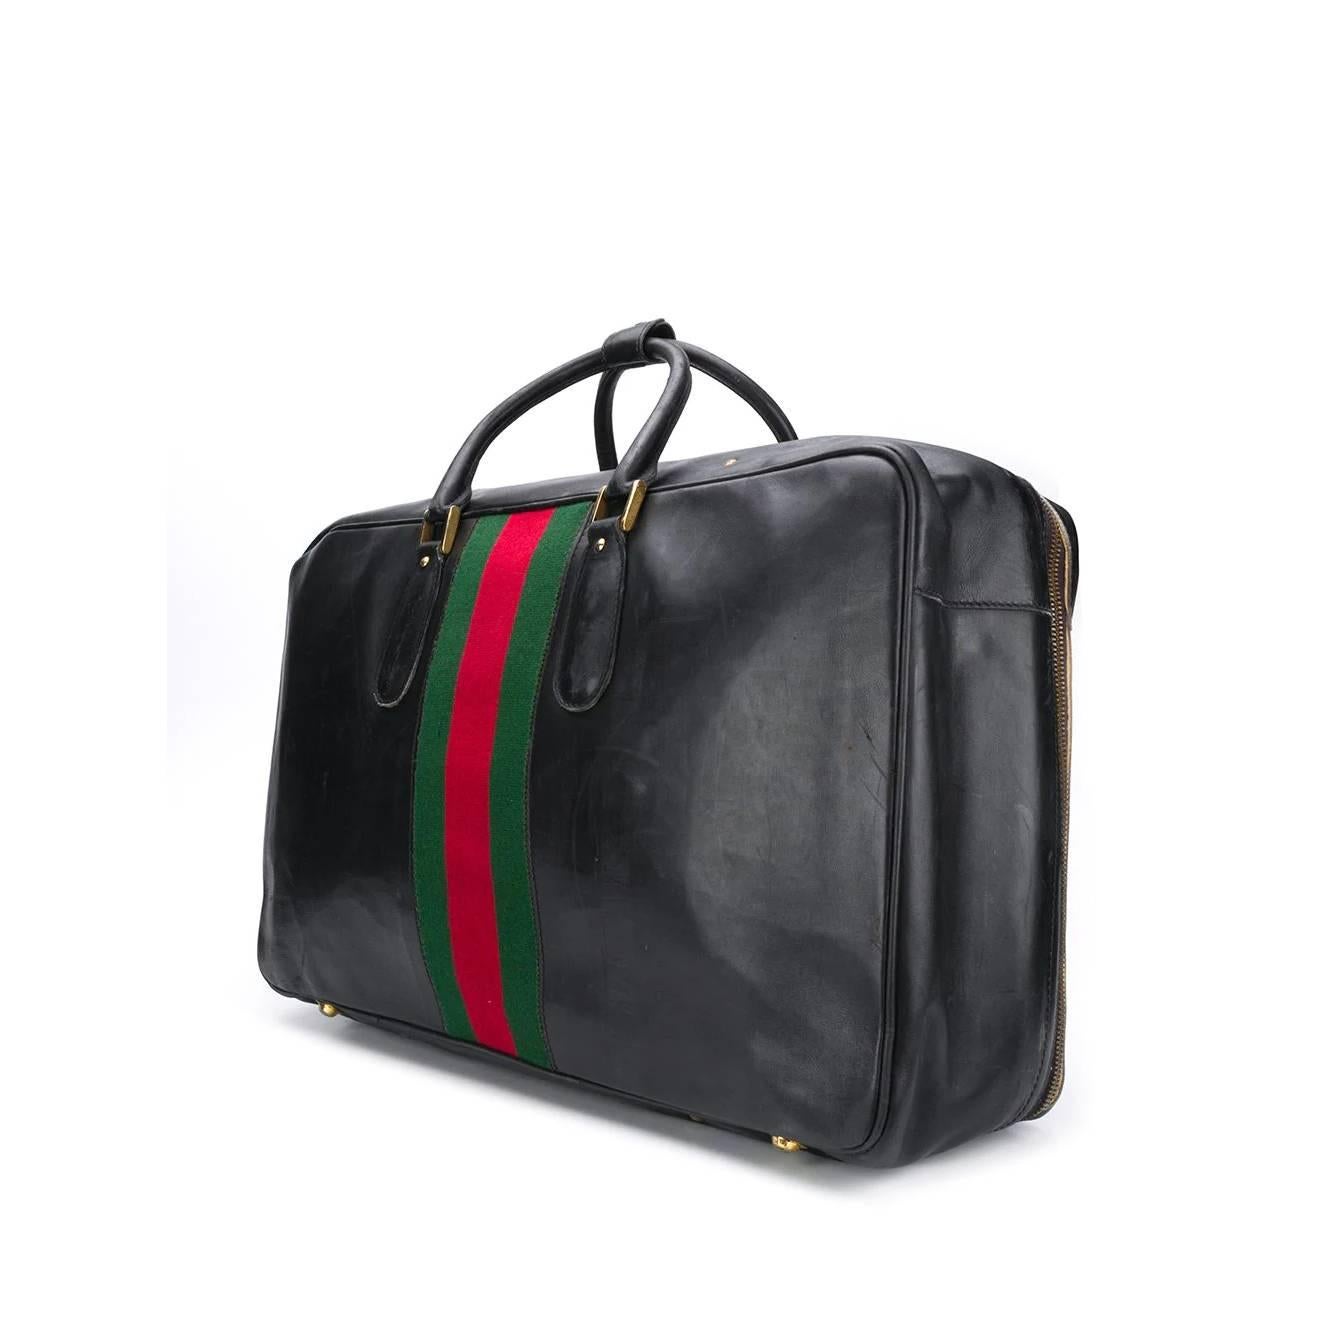 A.N.G.E.L.O. Vintage - ITALY 

Gucci black leather travel bag with green and red Sylvie Web detail and zip and buckle closure. Two rigid handles and metal feet on the bottom. Interior with elastic compartments and garment straps.

The product has